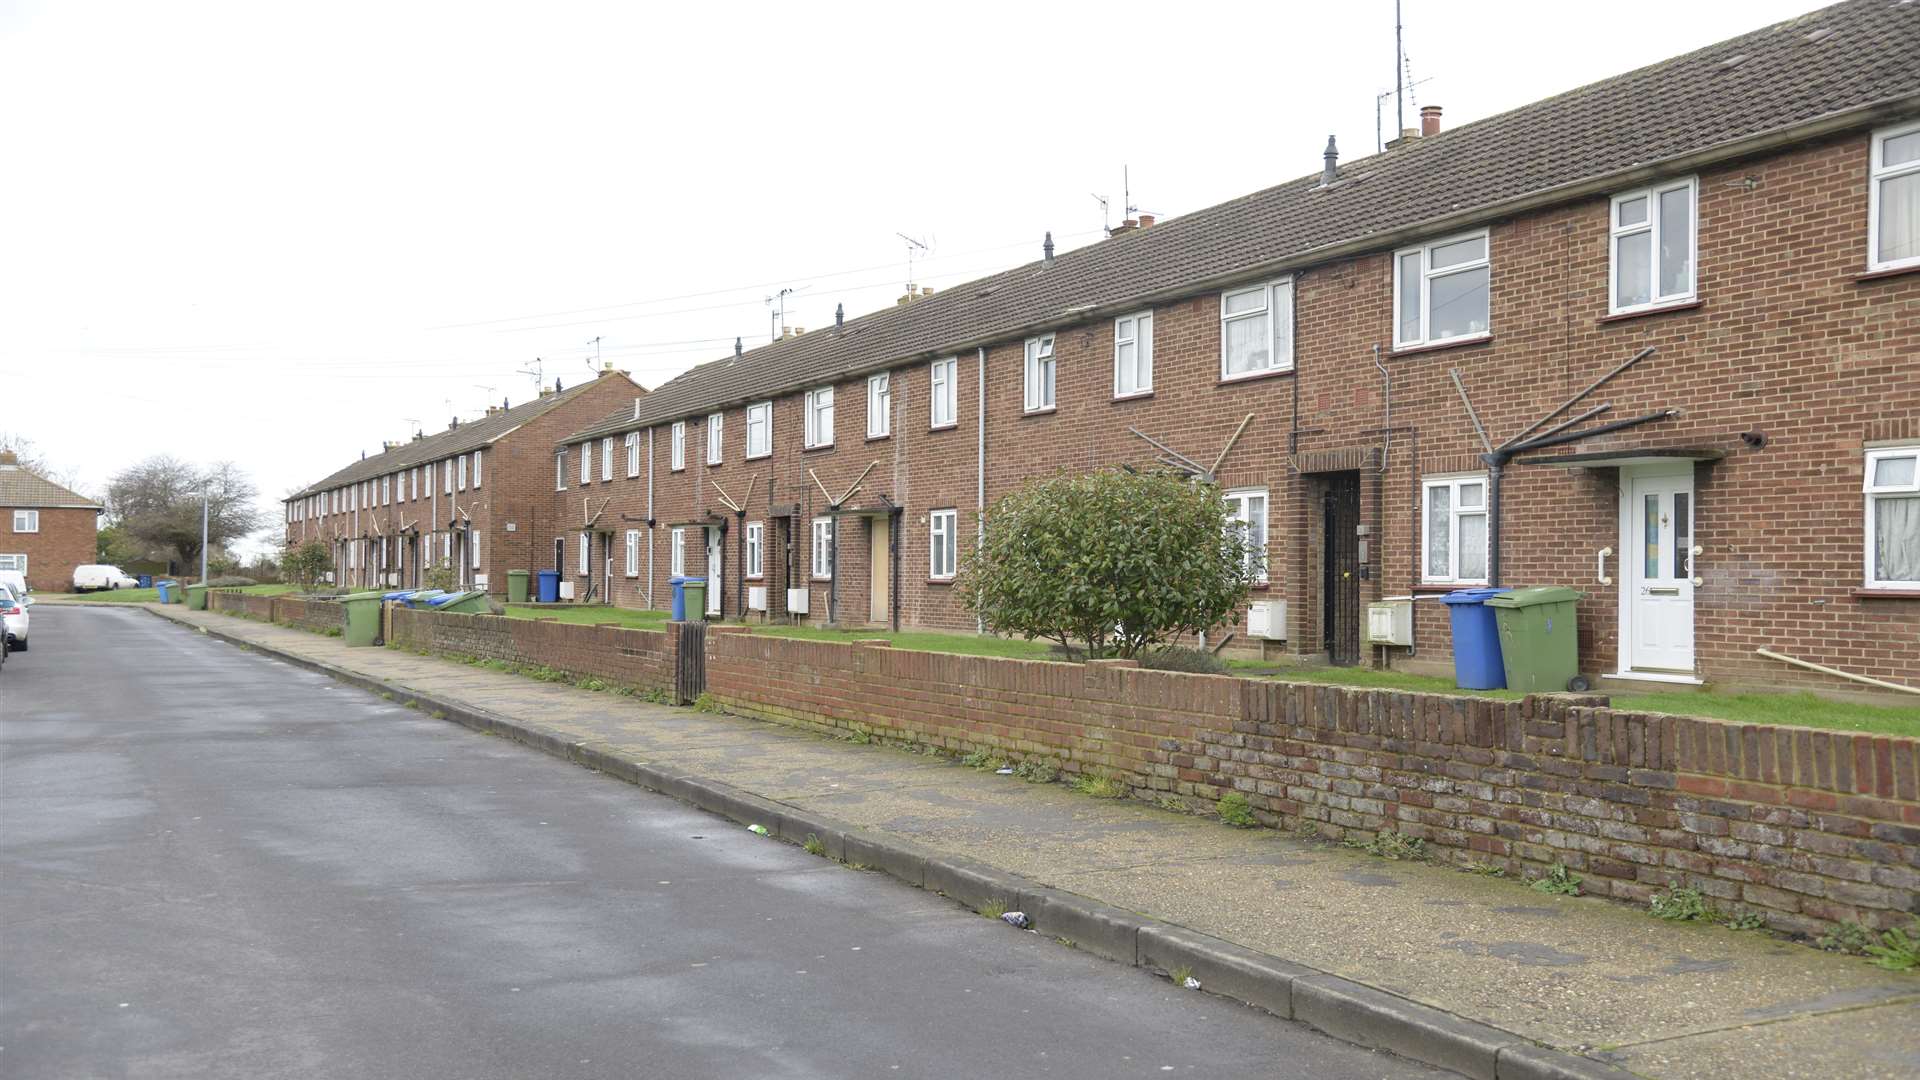 Brook Road, Faversham, where two cats were found dead